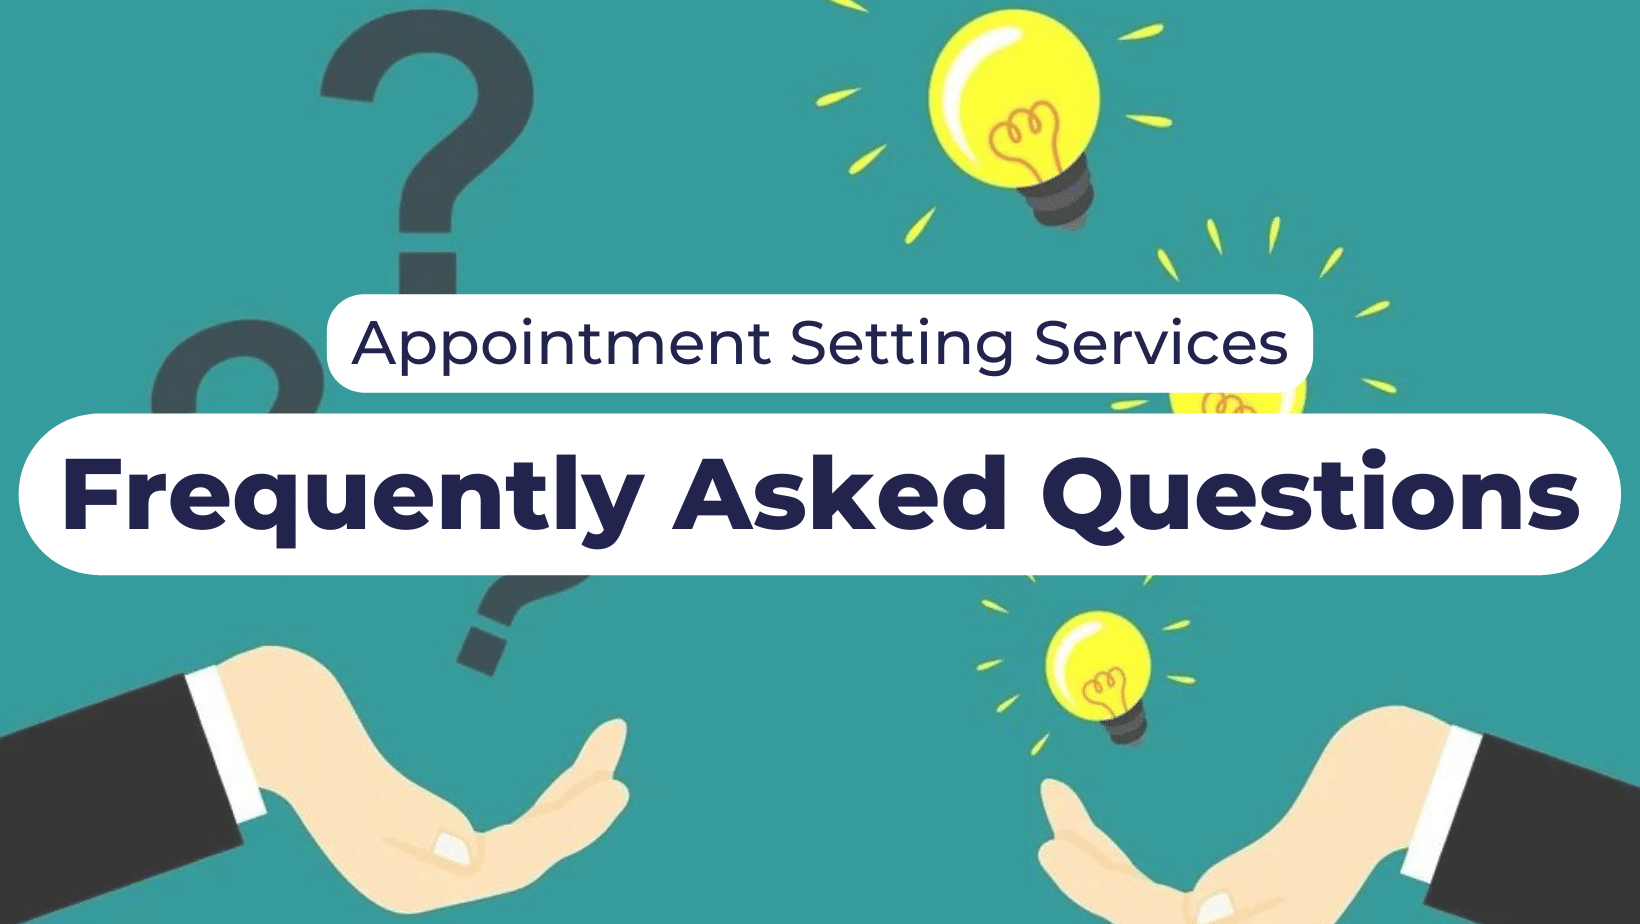 Appointment Setting Services: Frequently Asked Questions